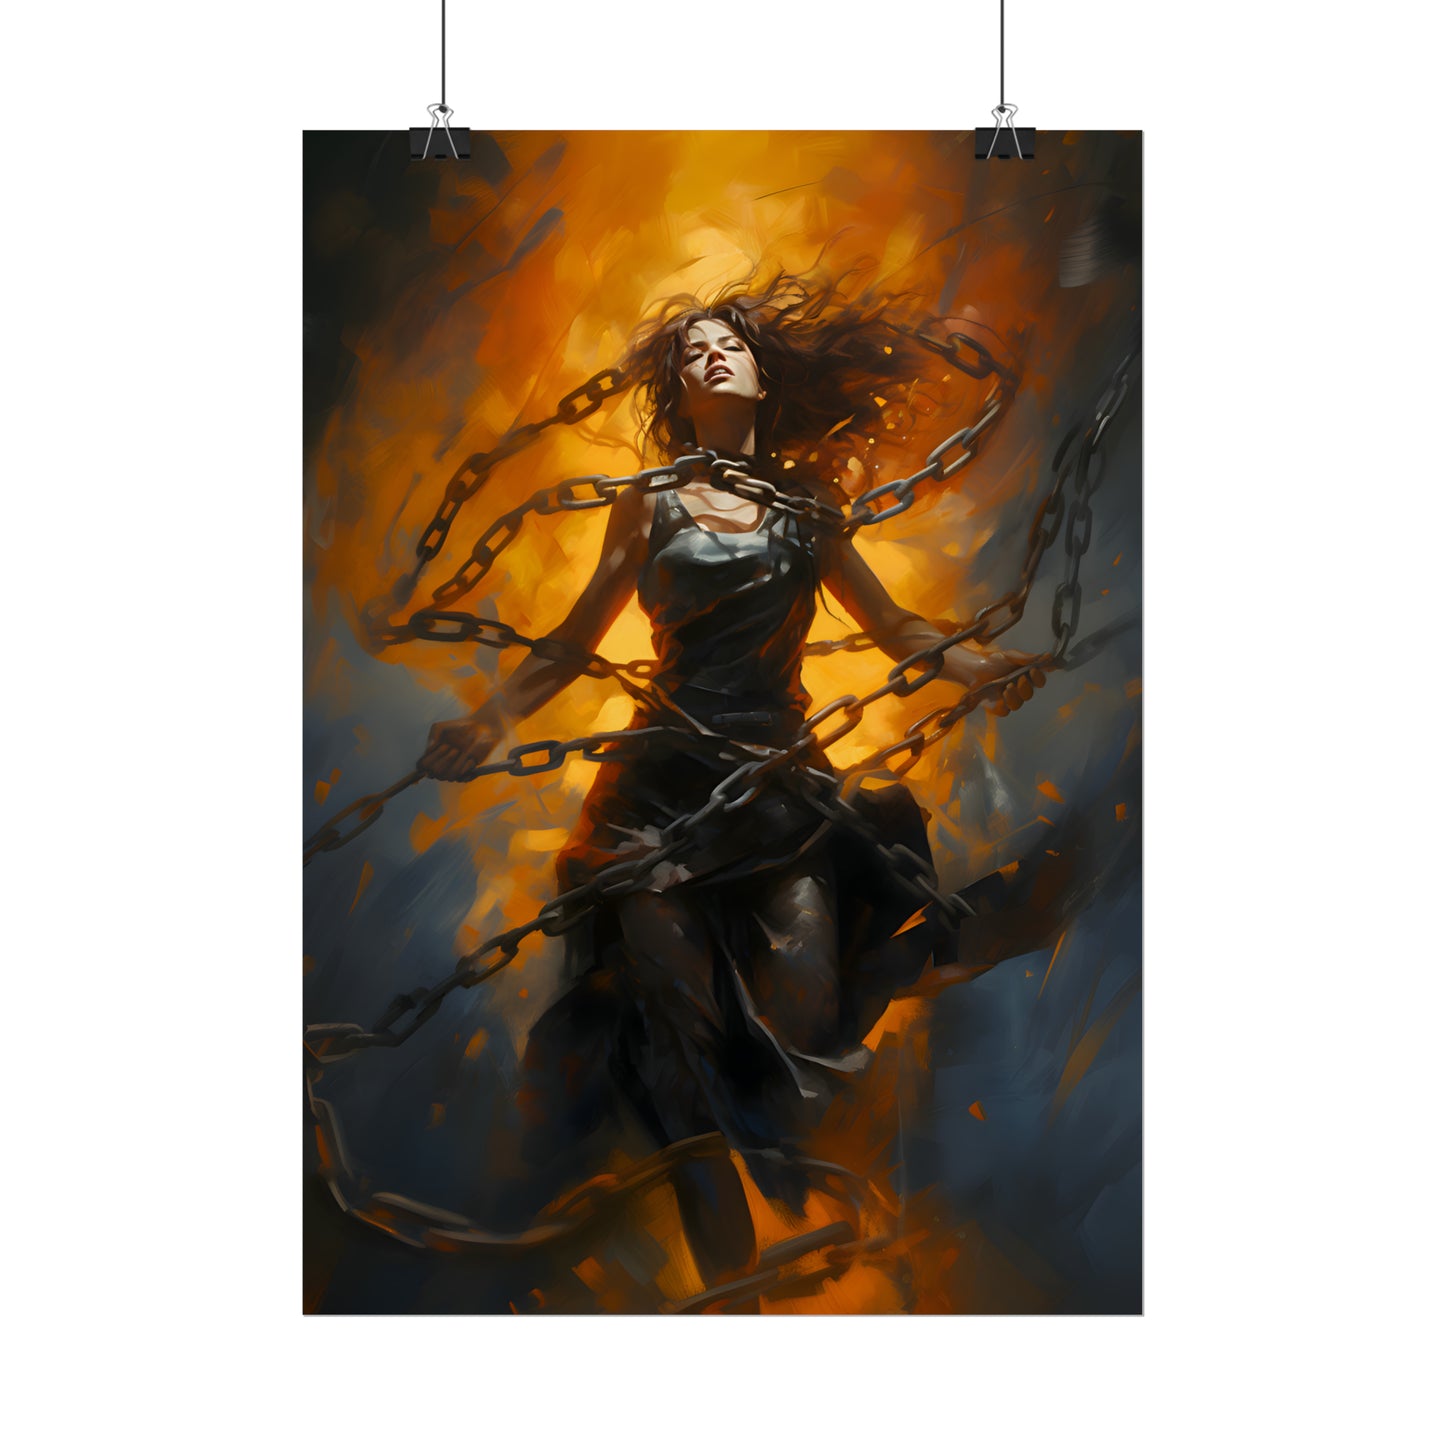 Breaking Free Art Print, Empowerment Wall Art, Female Strength Poster, Feminine Gift, Independence Oil Painting, Powerful Home Decor, Self Love Piece